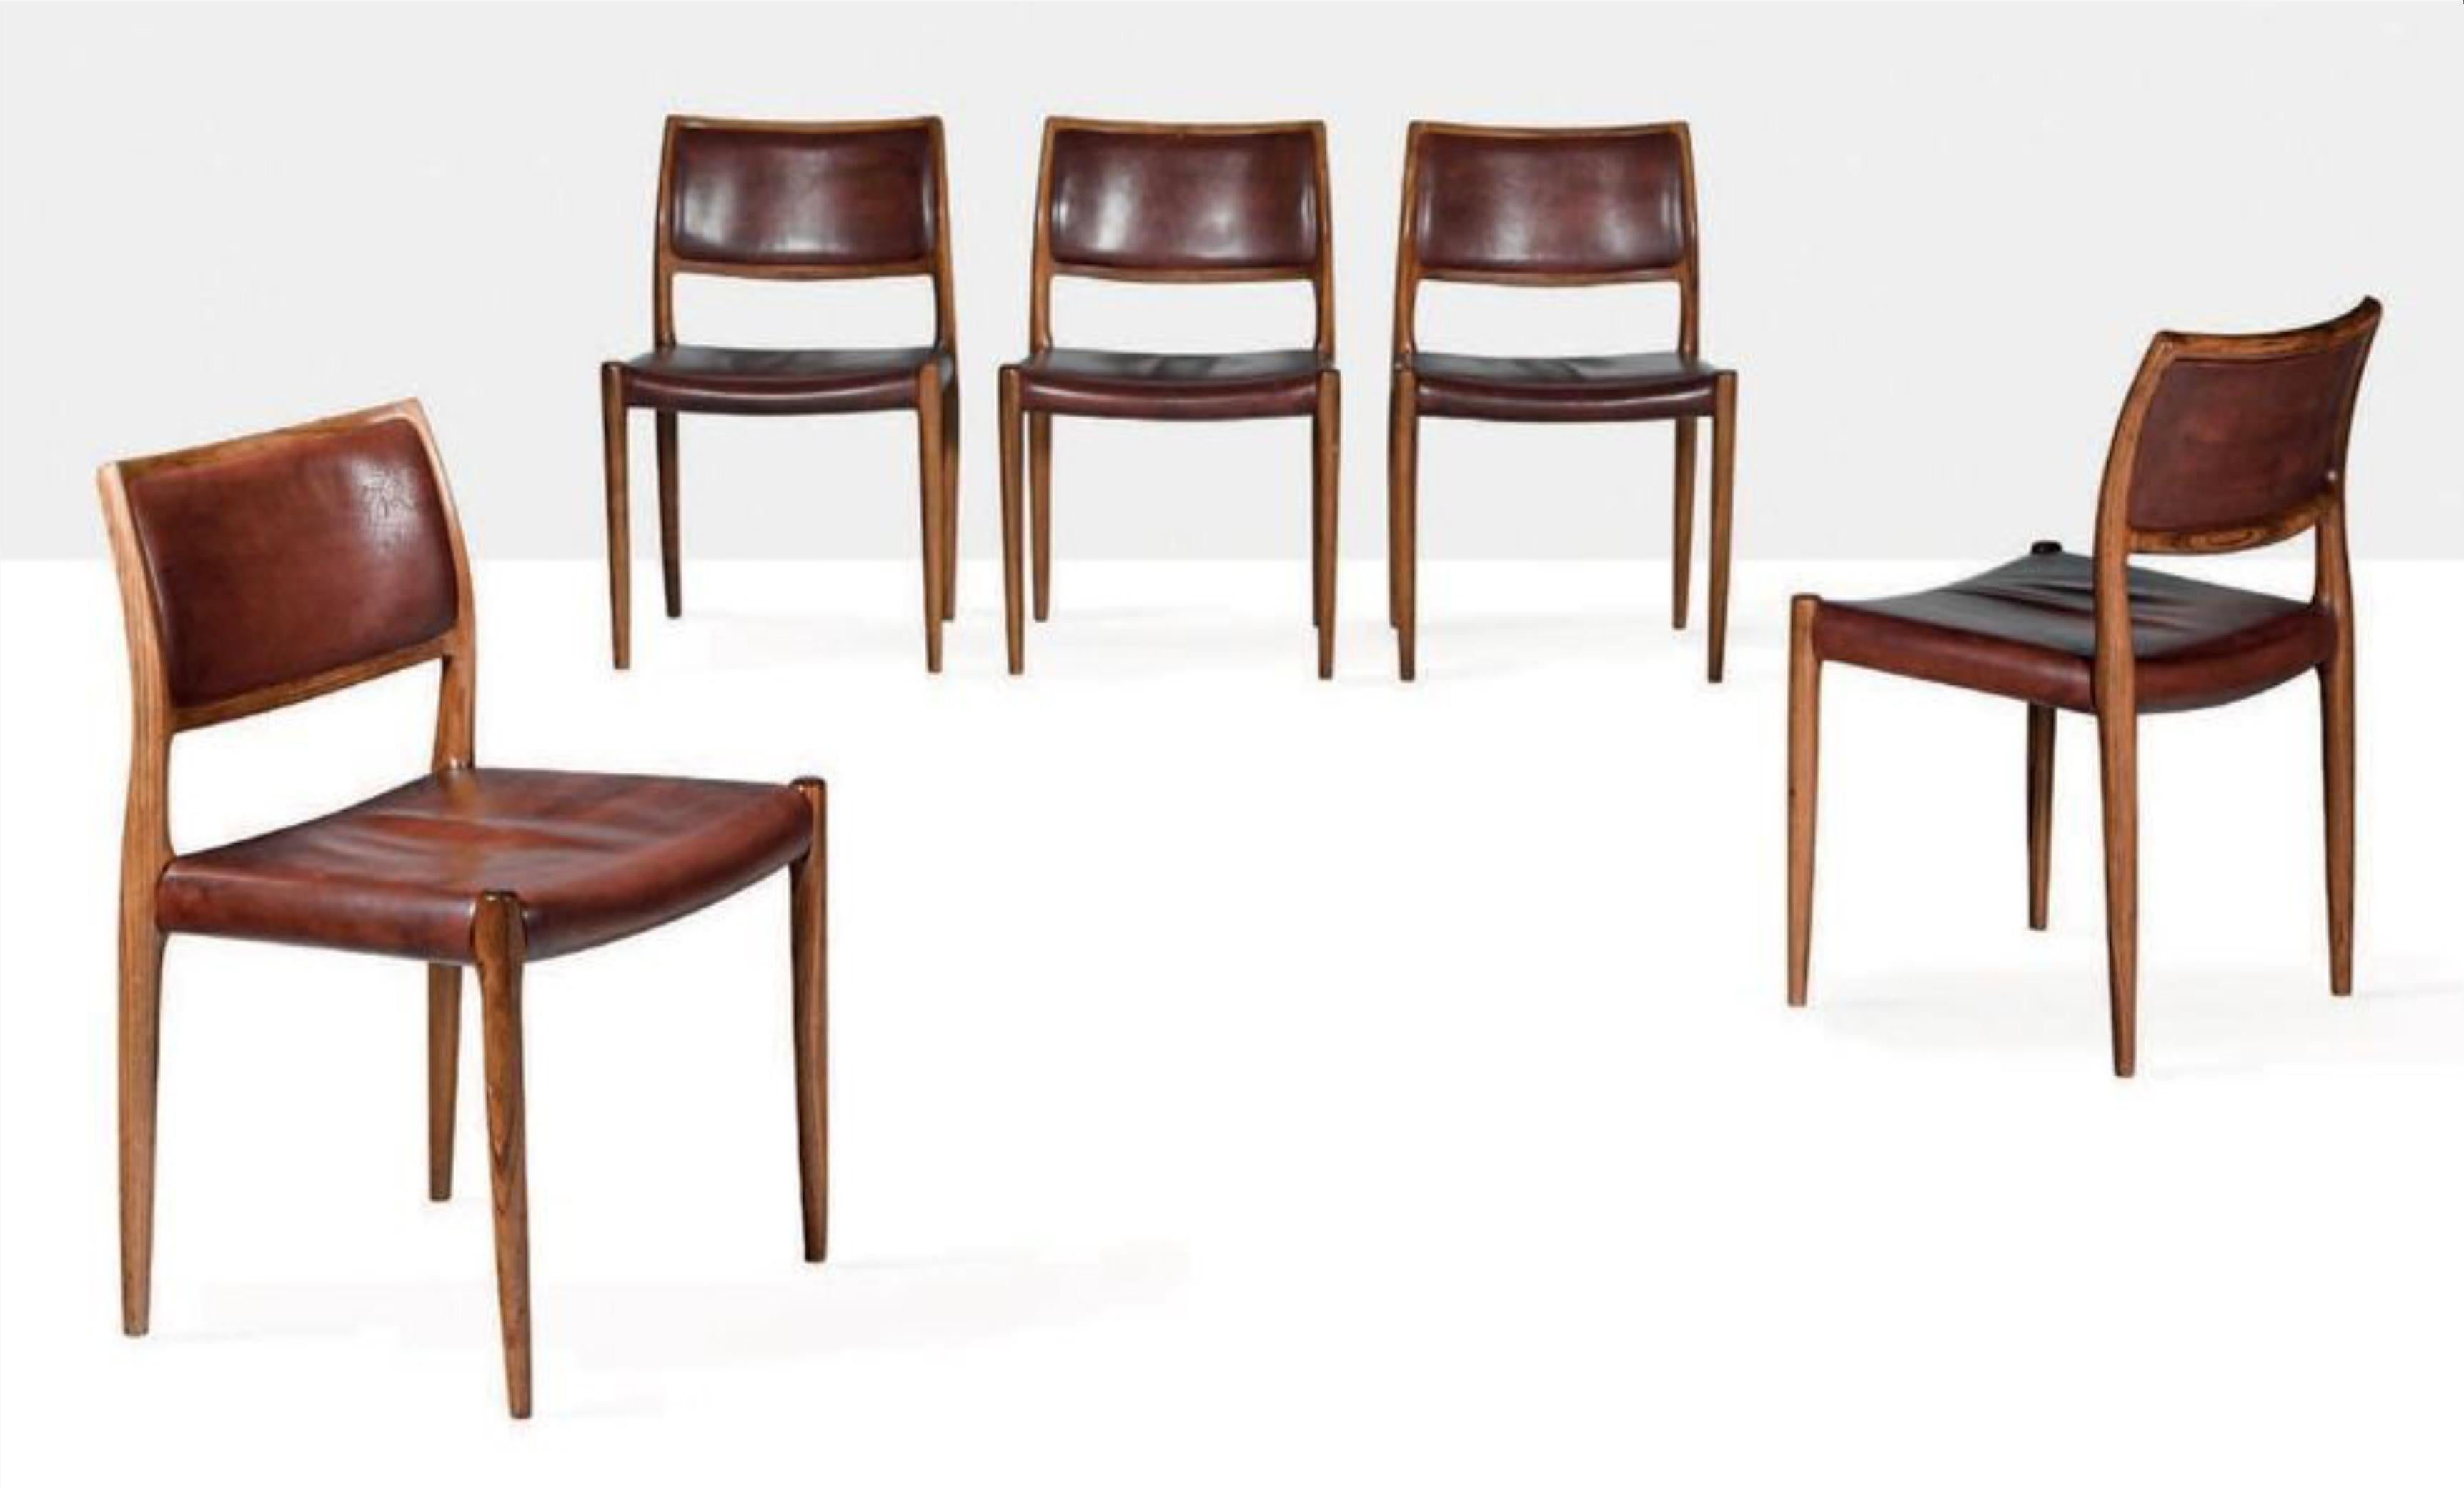 5 Dining chairs model 80 by Niels Otto Møller for J.L. Møller-Højbjerg, Denmark. Rosewood chairs with Original Cognac leather upholstery Model 80, 1970s Marked Moller under the seat.
5 chairs available Price for 1 chair 
good condition.